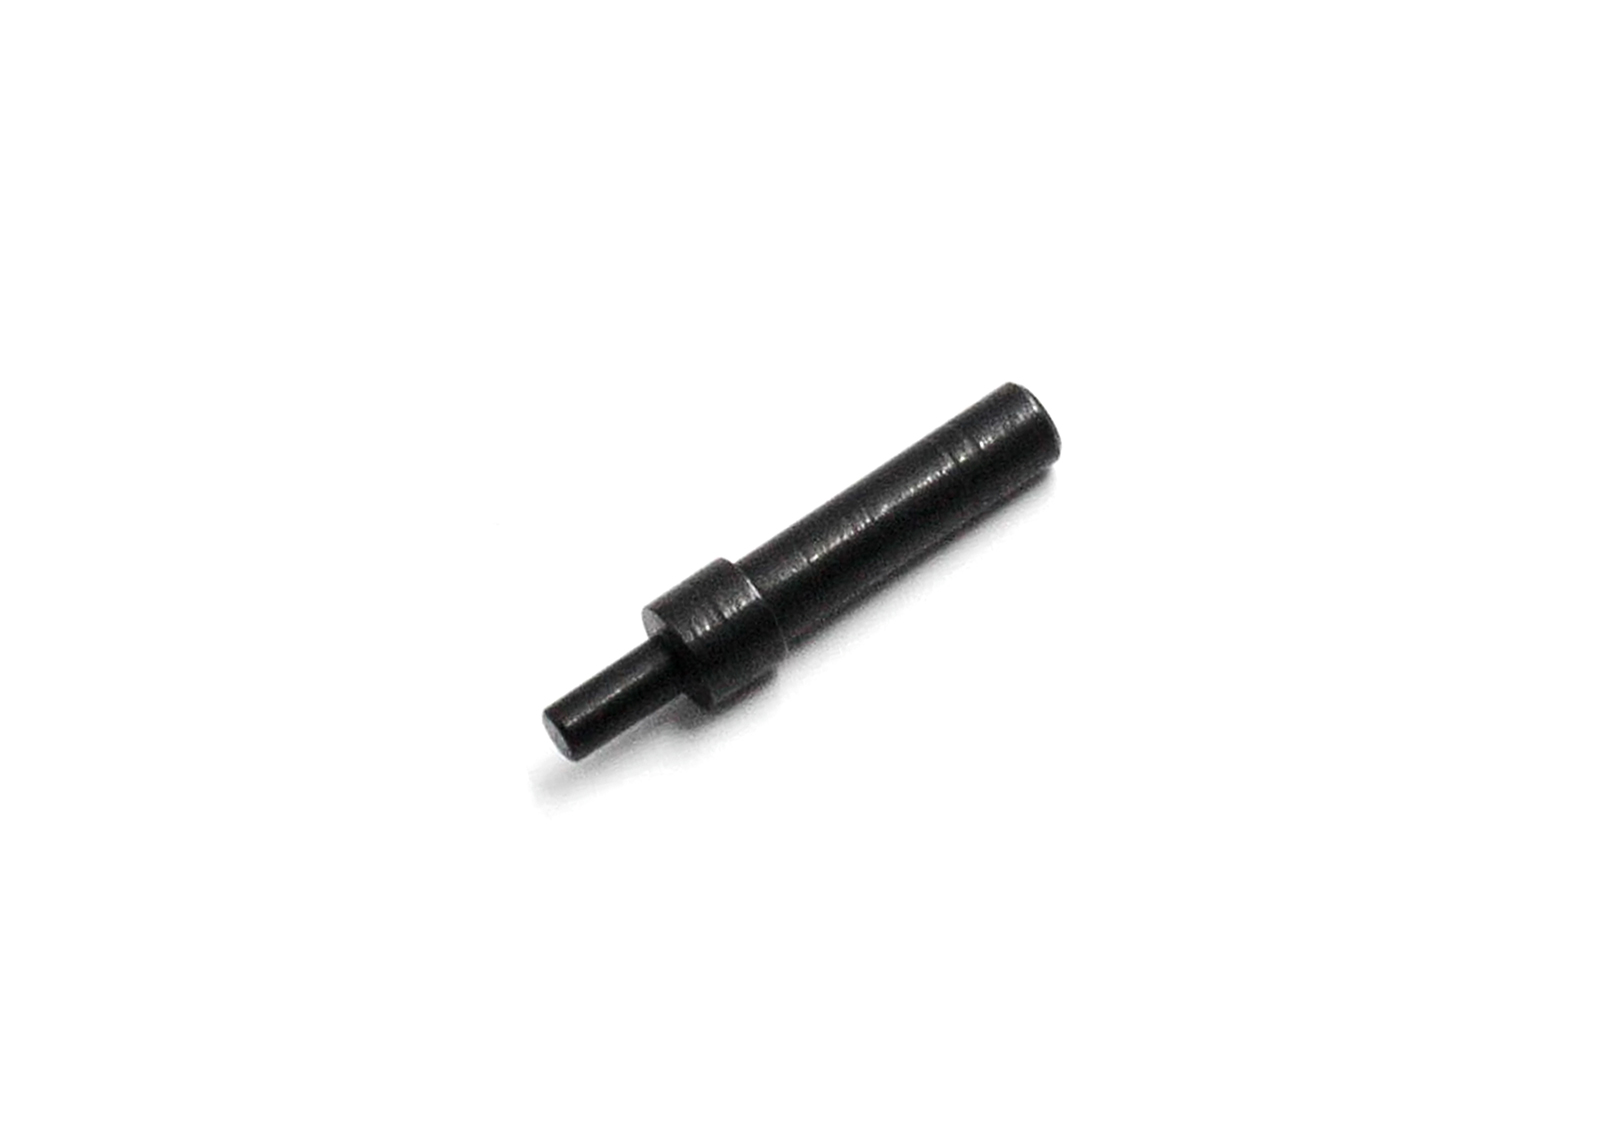 Enhanced Firing Pin for Western Arms .45 Series - Modify Airsoft